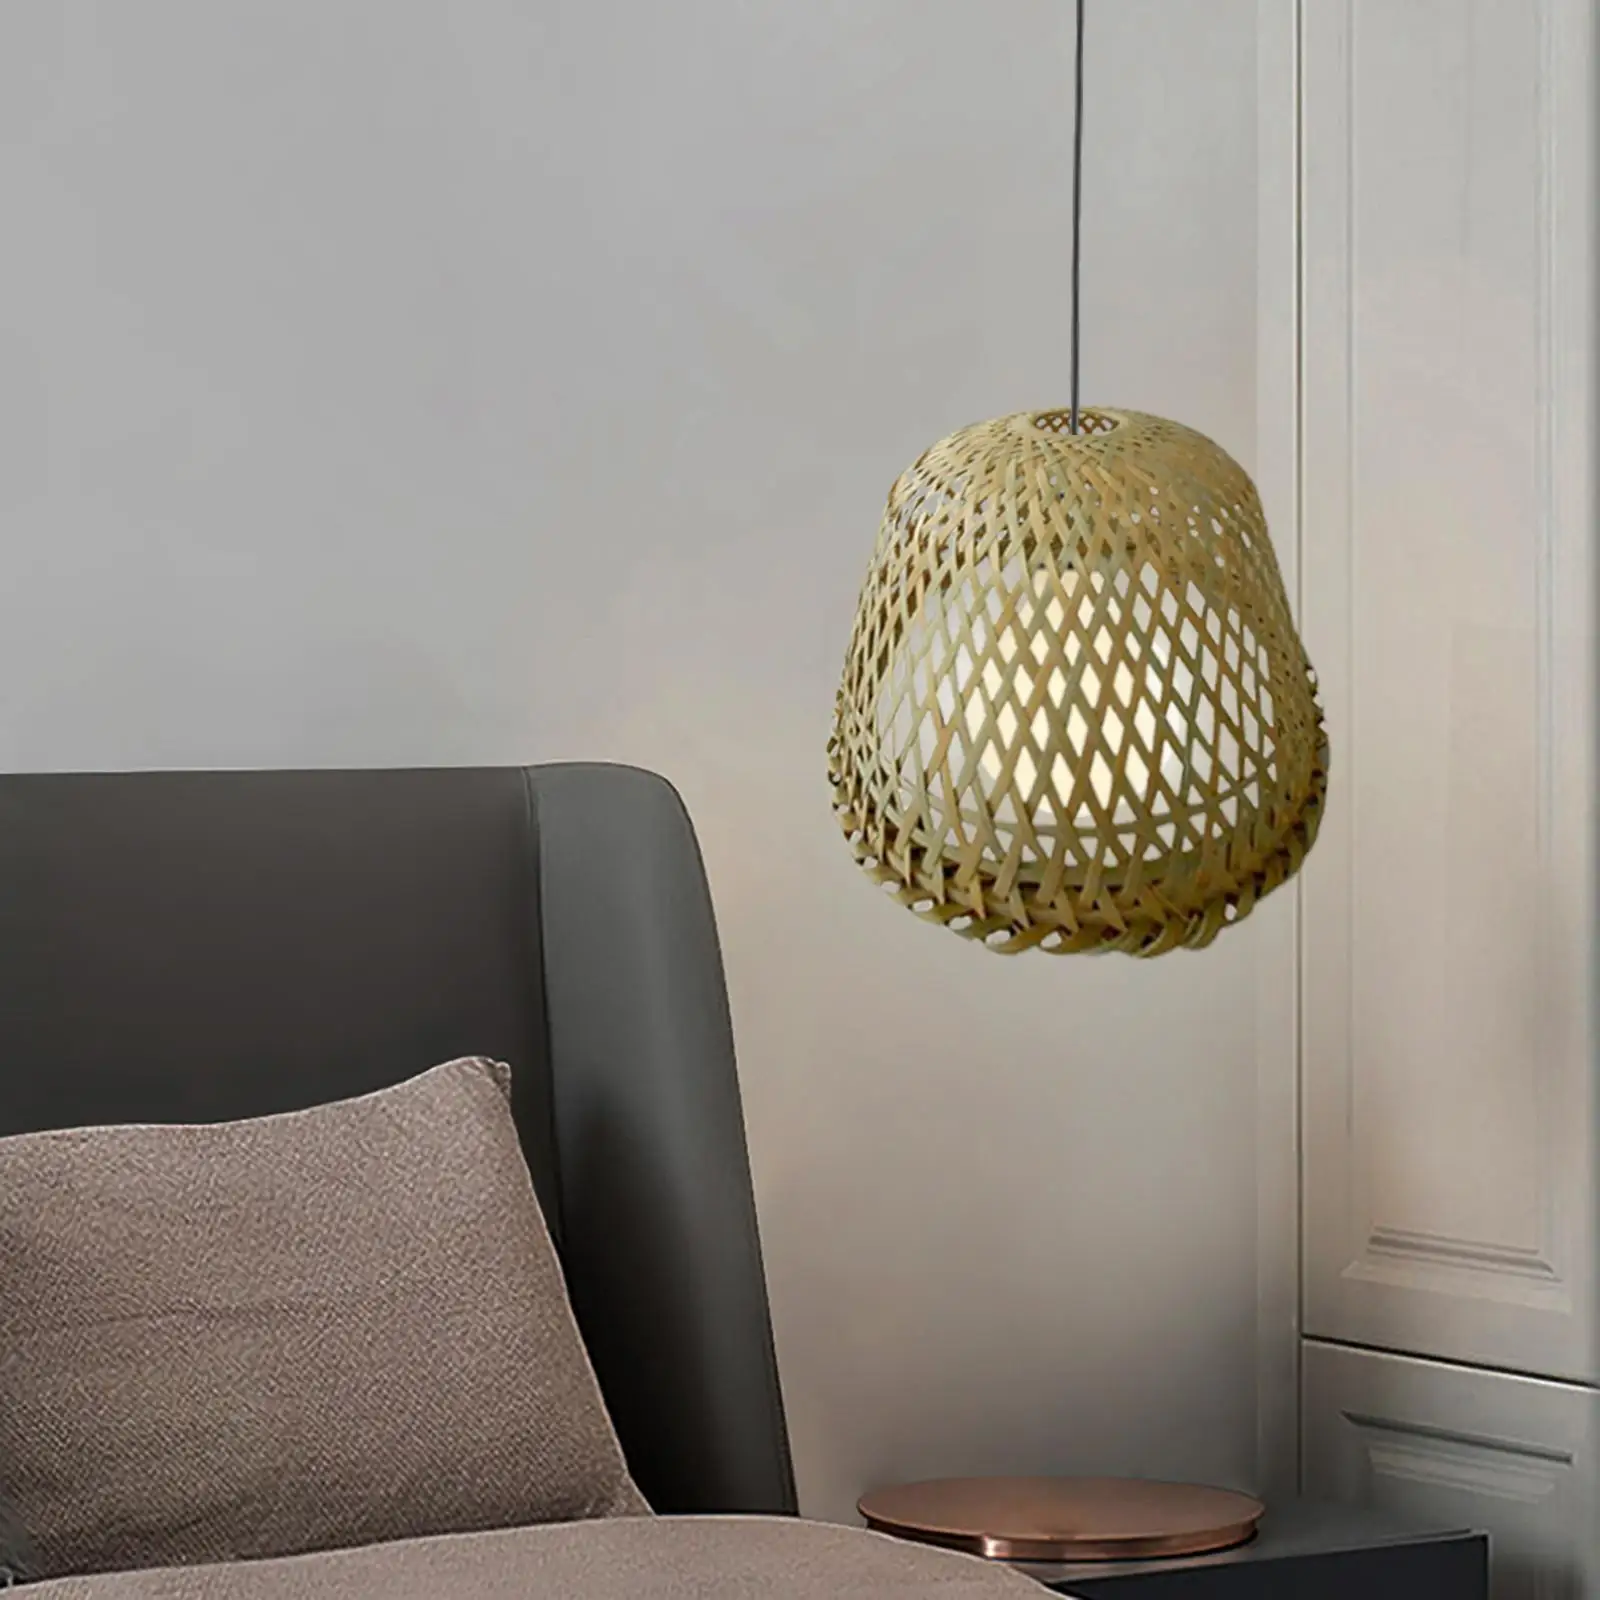 Bamboo Lamp Shade Handmade Woven Ceiling Light Fixture for Home Decorative